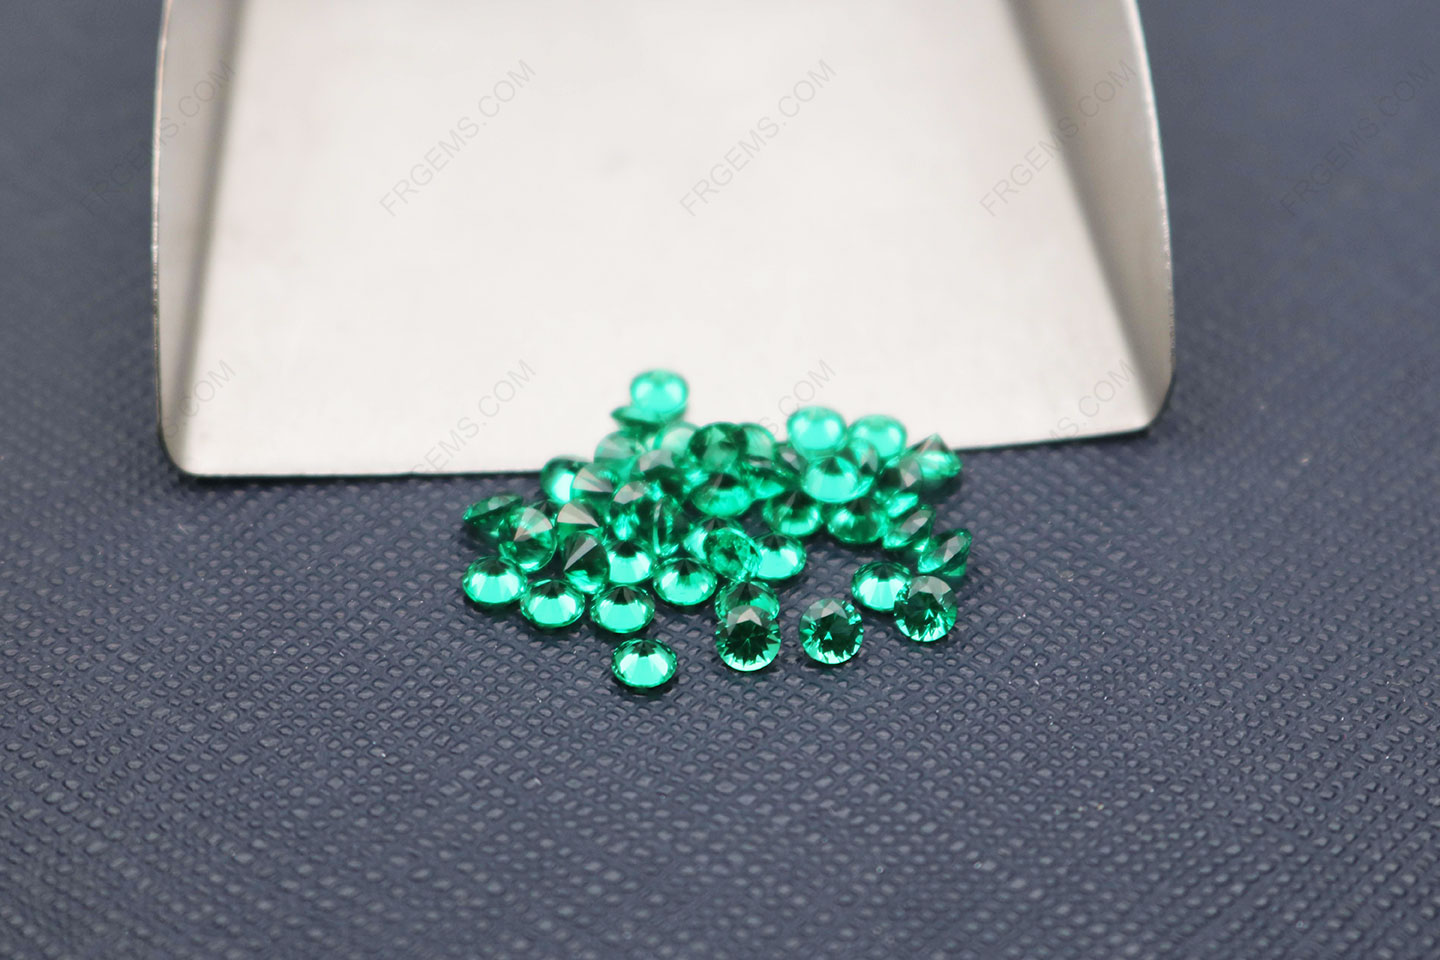 Wholesale Loose Nano Emerald Green #112 Color Round Shape Faceted Cut 3mm gemstones